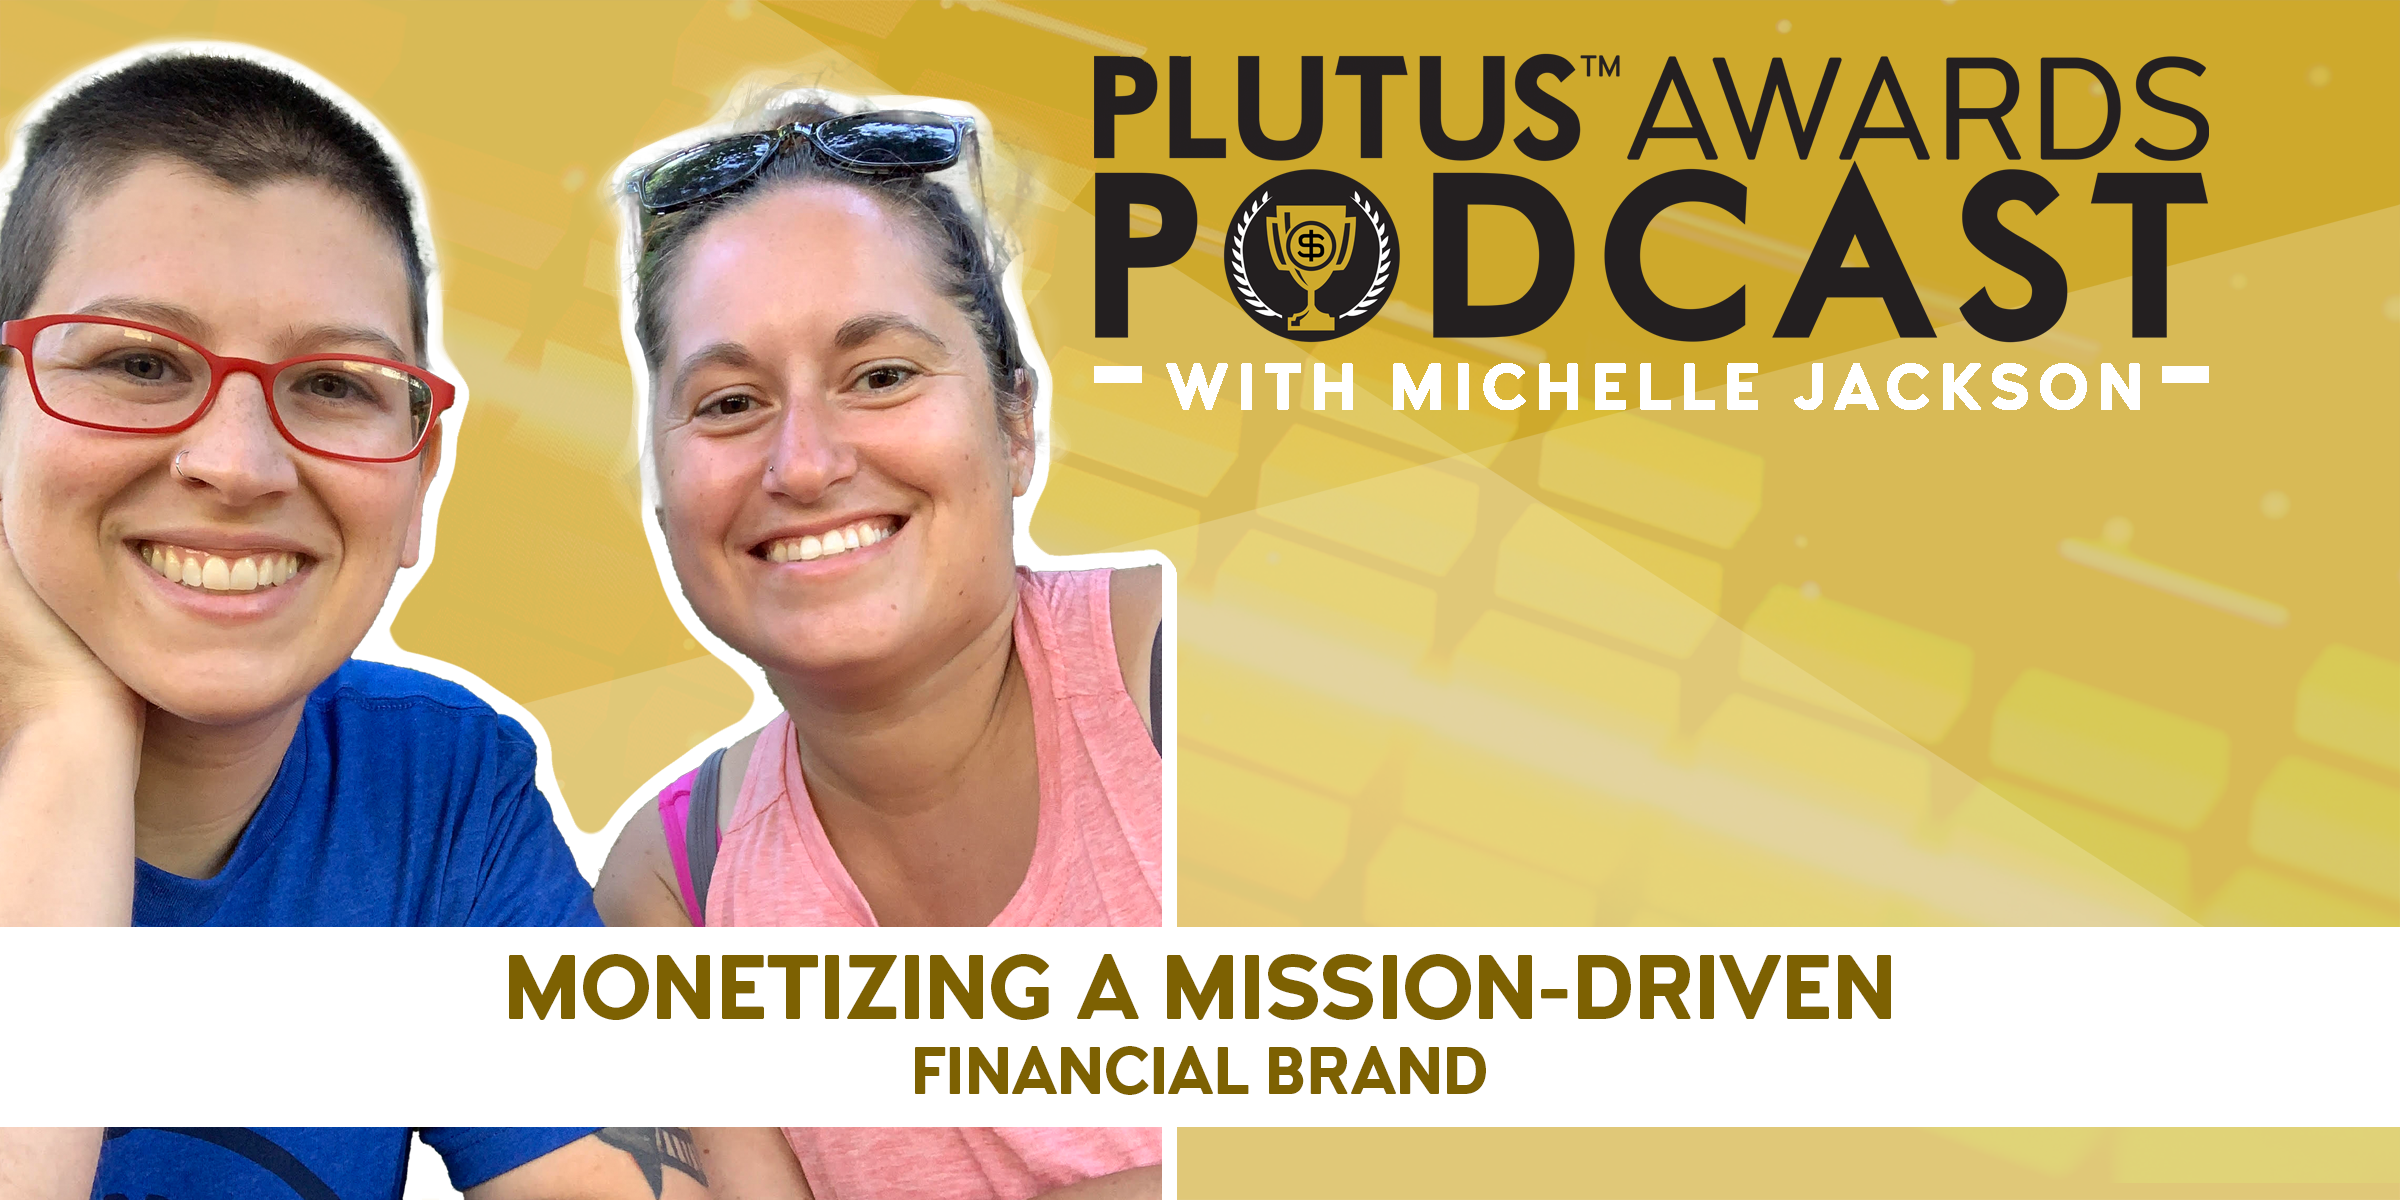 Plutus Awards podcast - Women's Personal Finance Featured Image